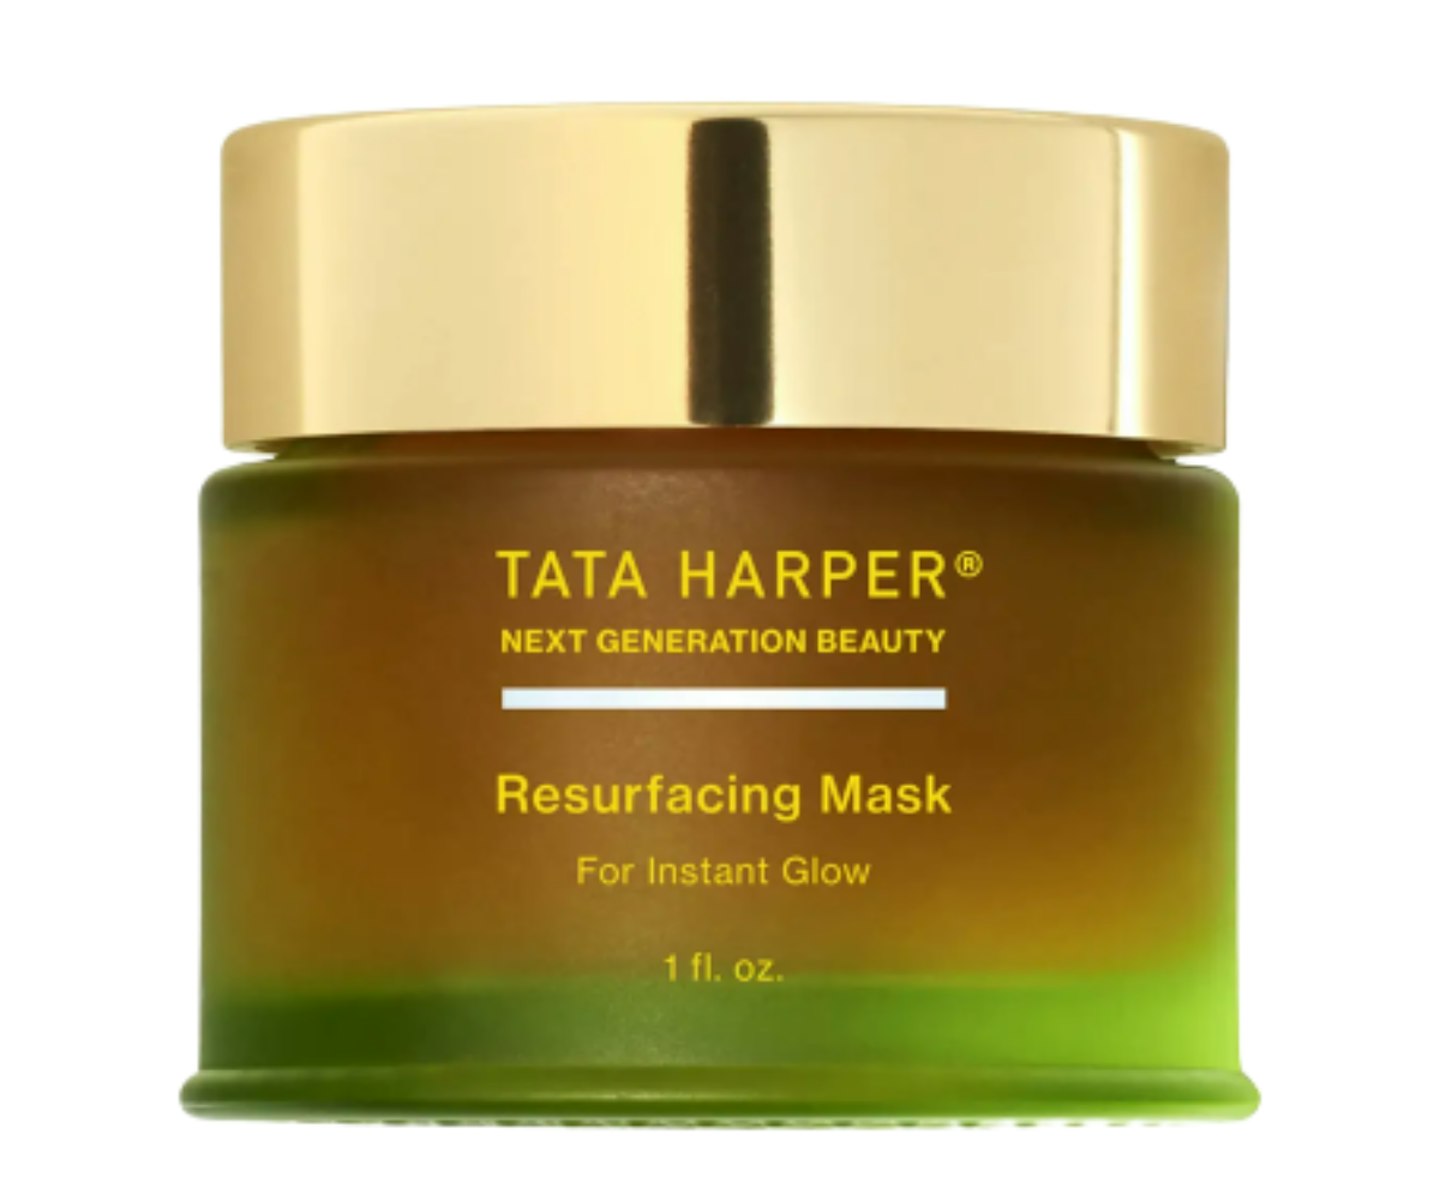 A picture of the Tata Harper Resurfacing Mask